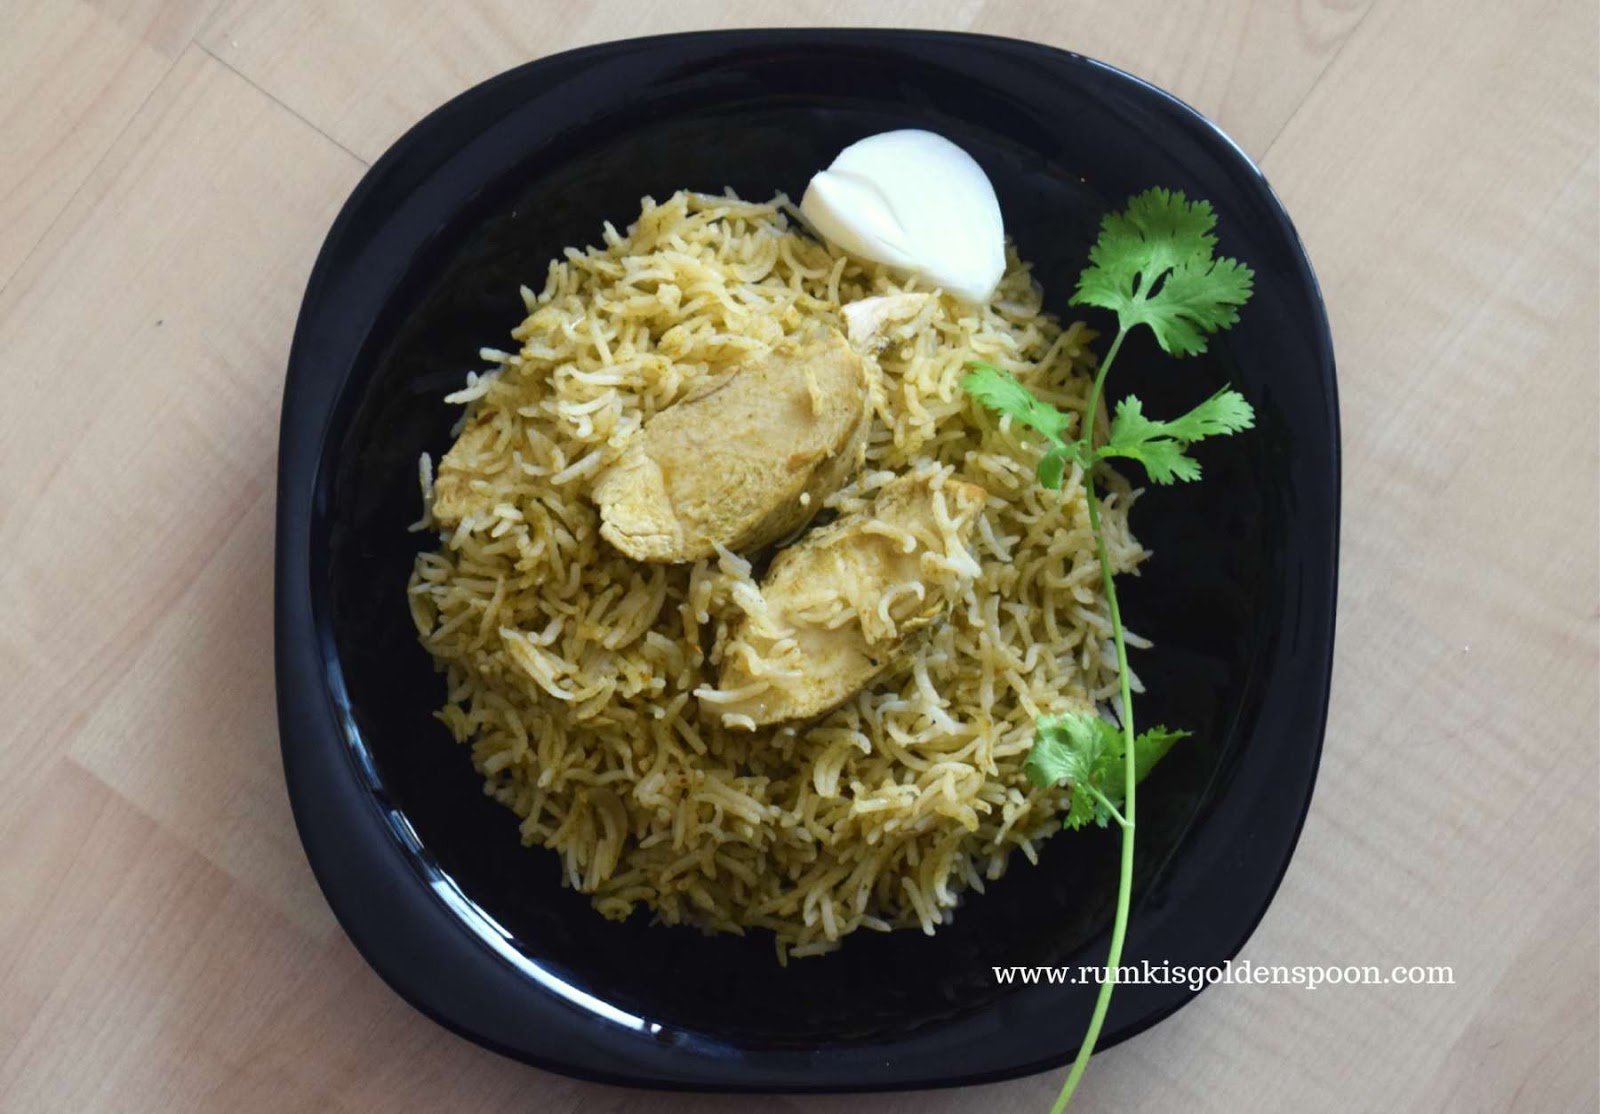 Quick and Easy, Rumki's Golden Spoon, One Pot Chicken-Cilantro-Rice with Leftover Chicken, Dhania Murg Pulao, dhania rice, chicken rice recipe, nonveg rice item recipe, coriander rice, recipe with leftover chicken, recipe with cooked chicken